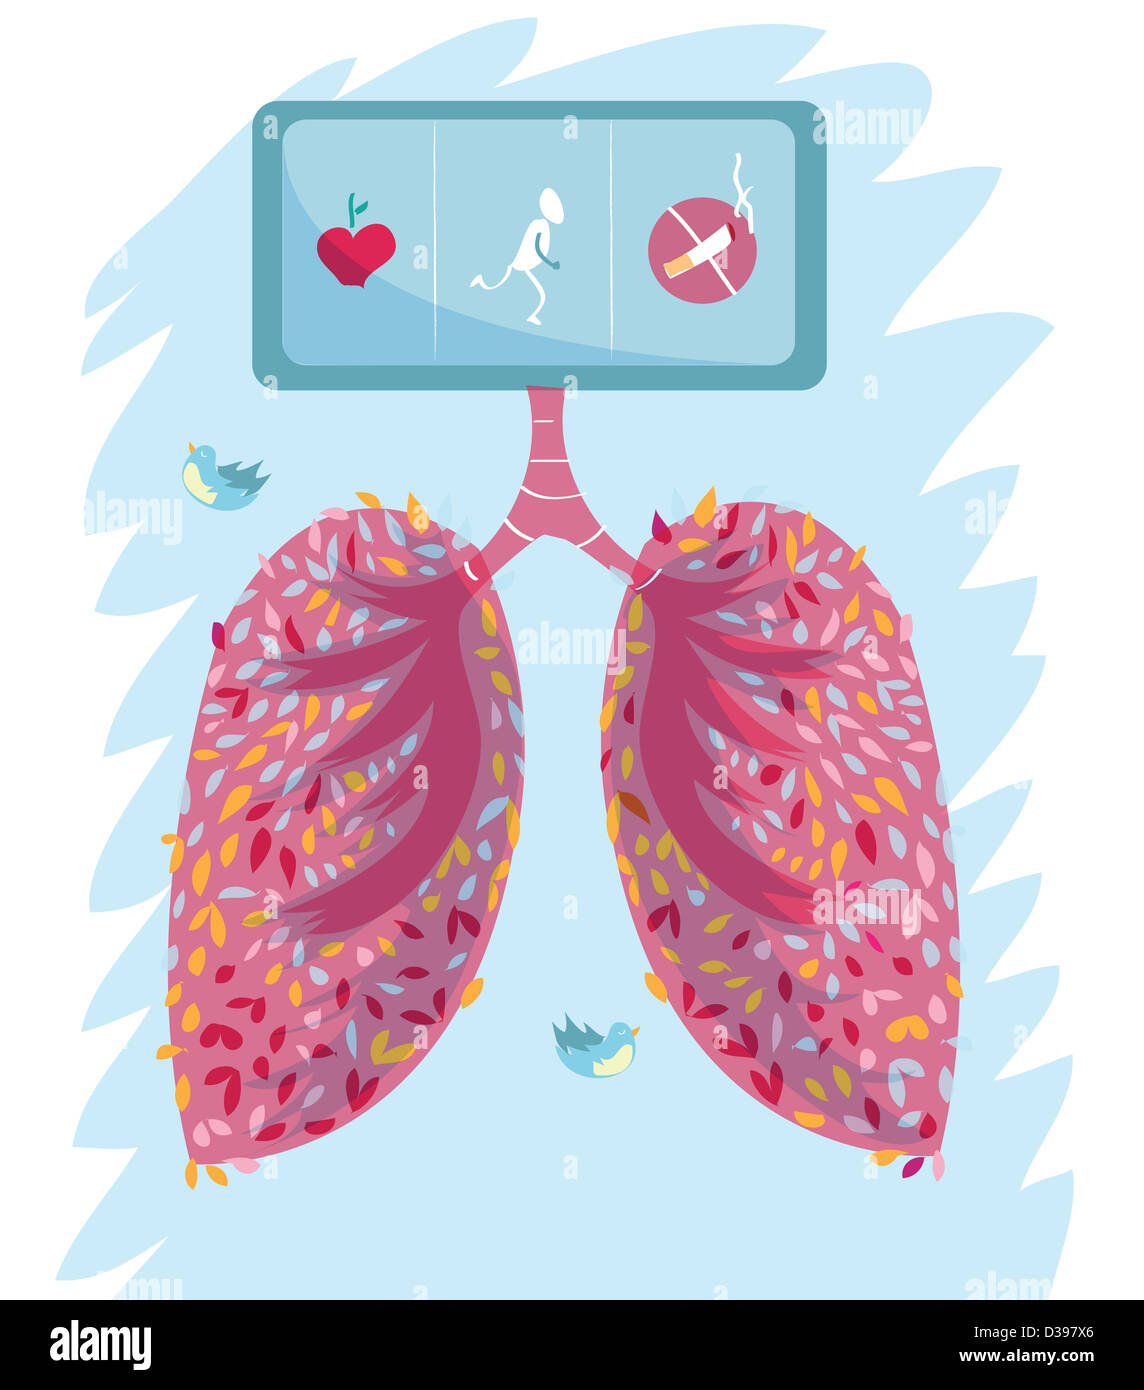 Cardiac with no smoking sign and apple depicting healthy lungs Stock Photo